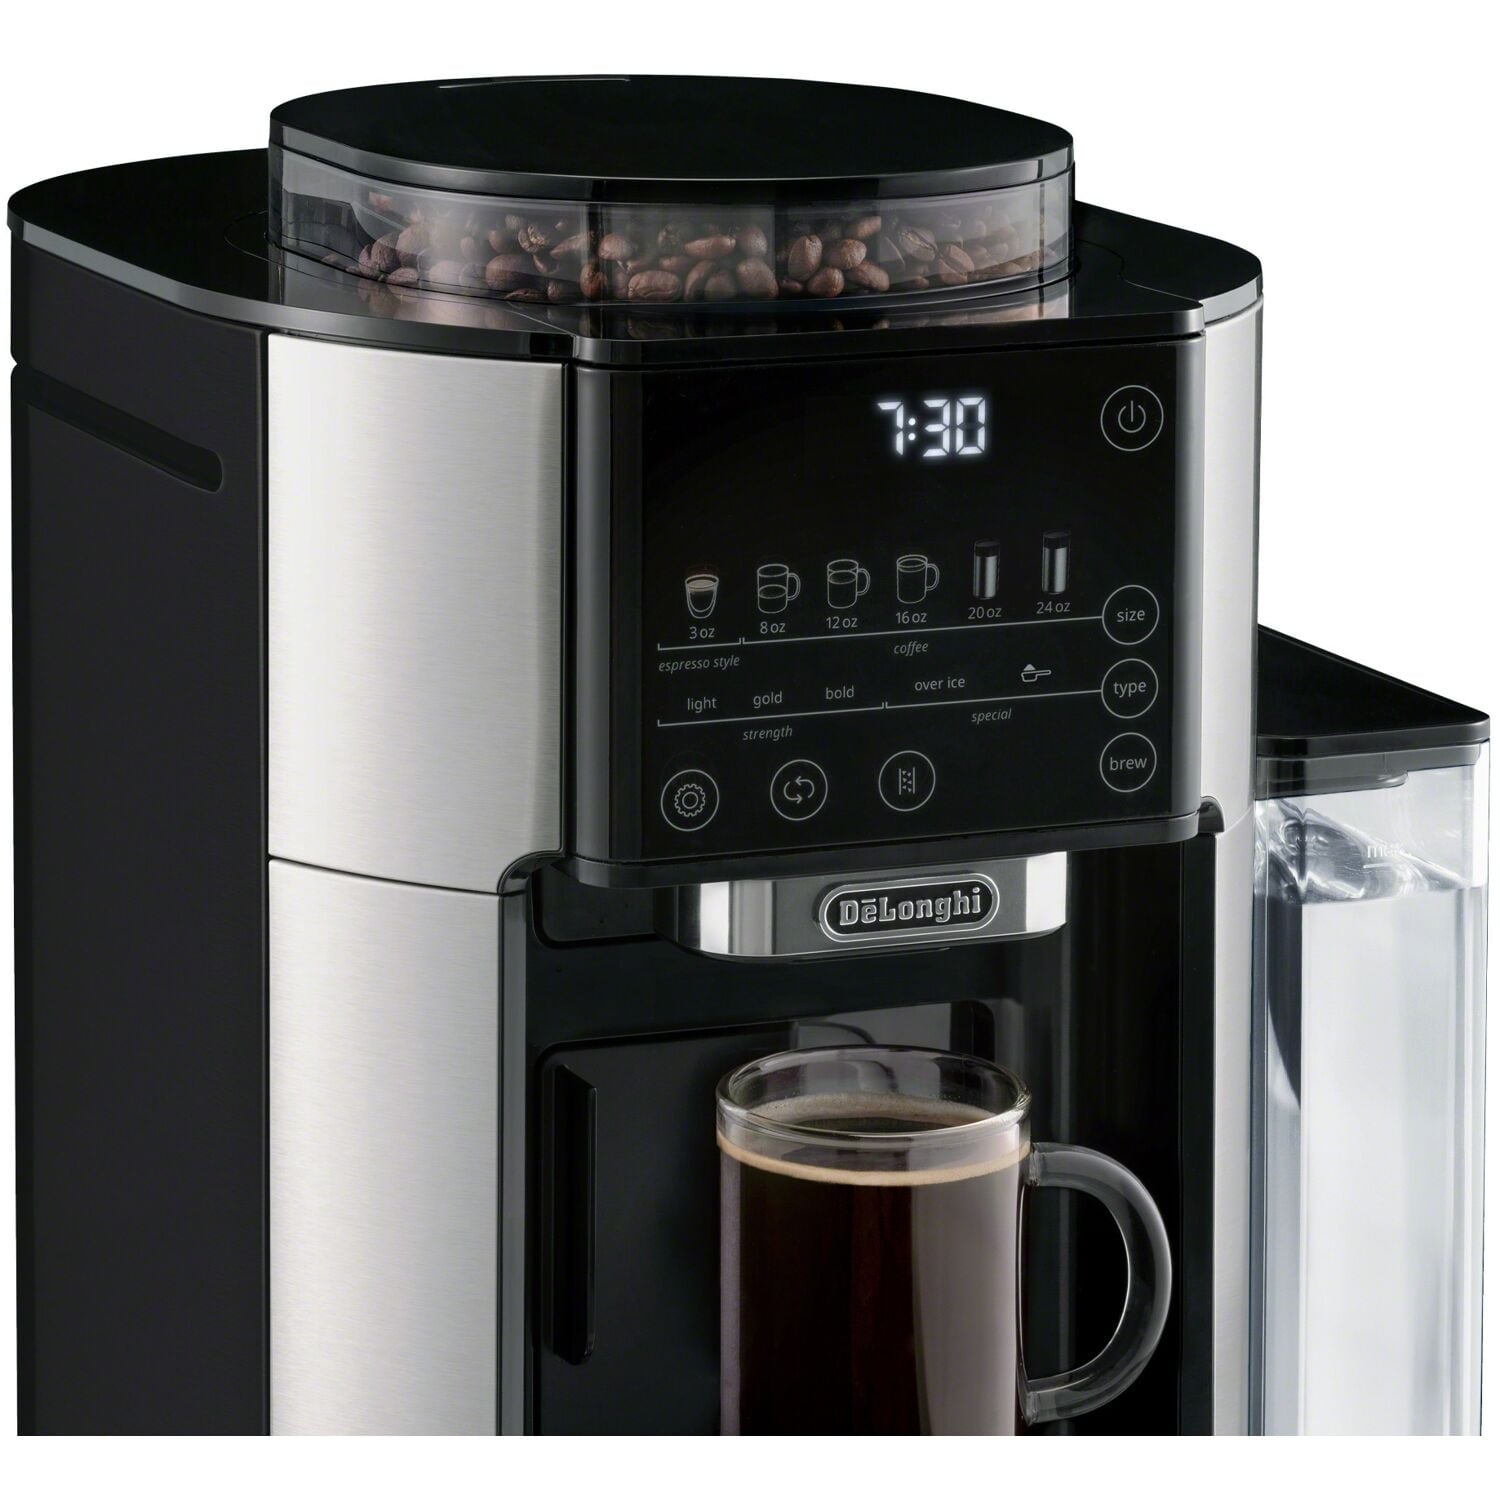 https://ak1.ostkcdn.com/images/products/is/images/direct/e6bf3ecbcf054a4bcf0752105a7c3c427d51d653/DeLonghi-TrueBrew-Automatic-Single-Serve-Drip-Coffee-Maker-with-Built-In-Grinder-and-Bean-Extract-Technology.jpg